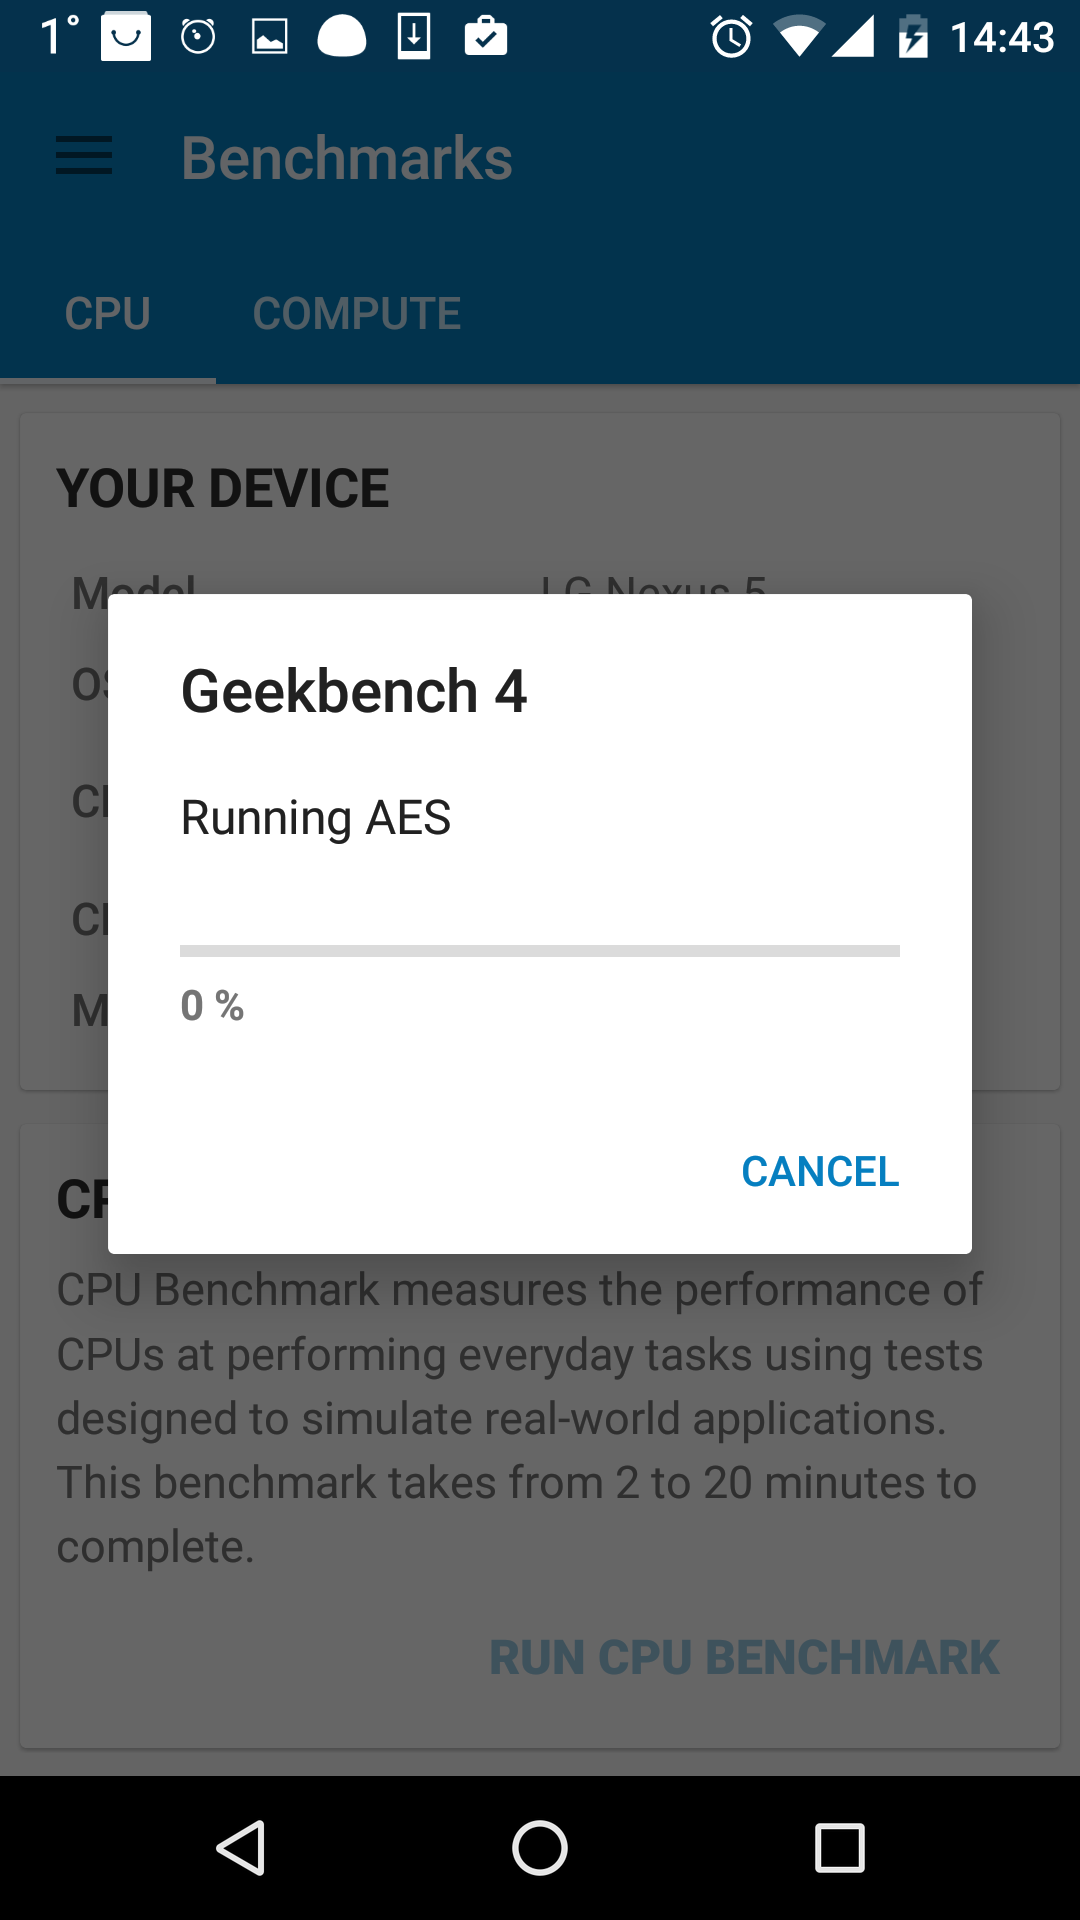 Applications for analyzing Android devices